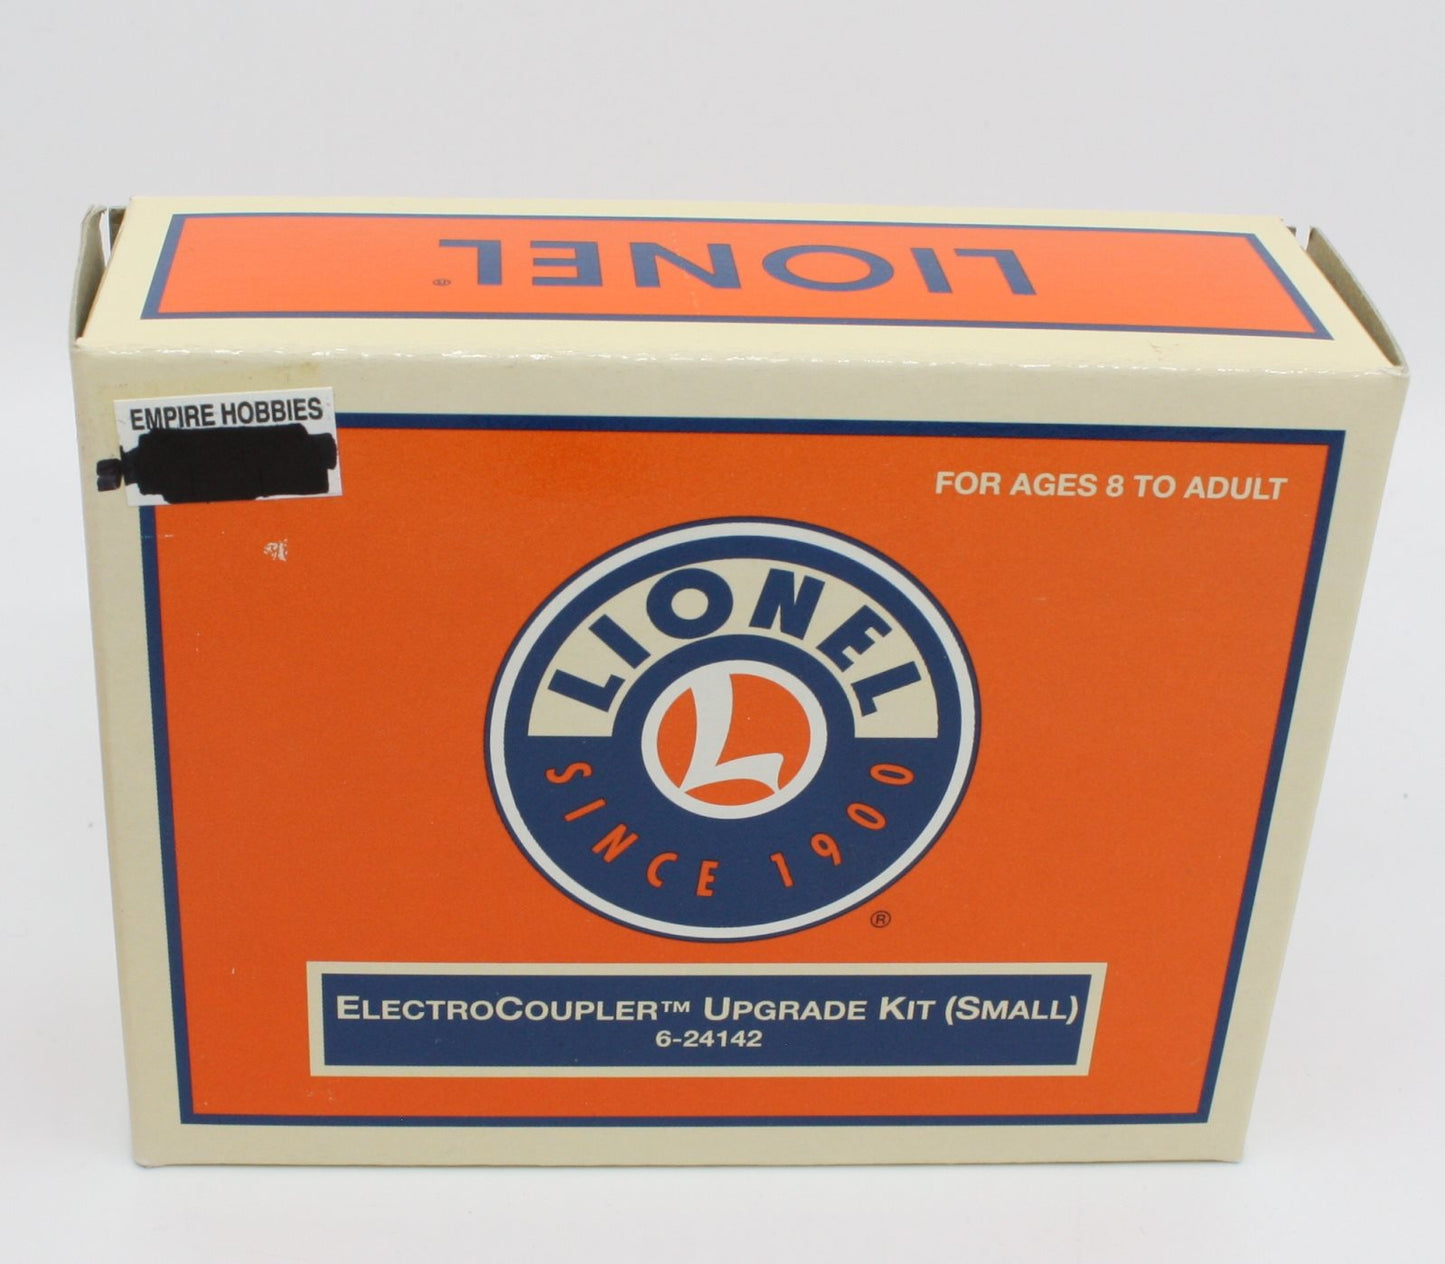 Lionel 6-24142 Electrocoupler Upgrade Kit (Small)